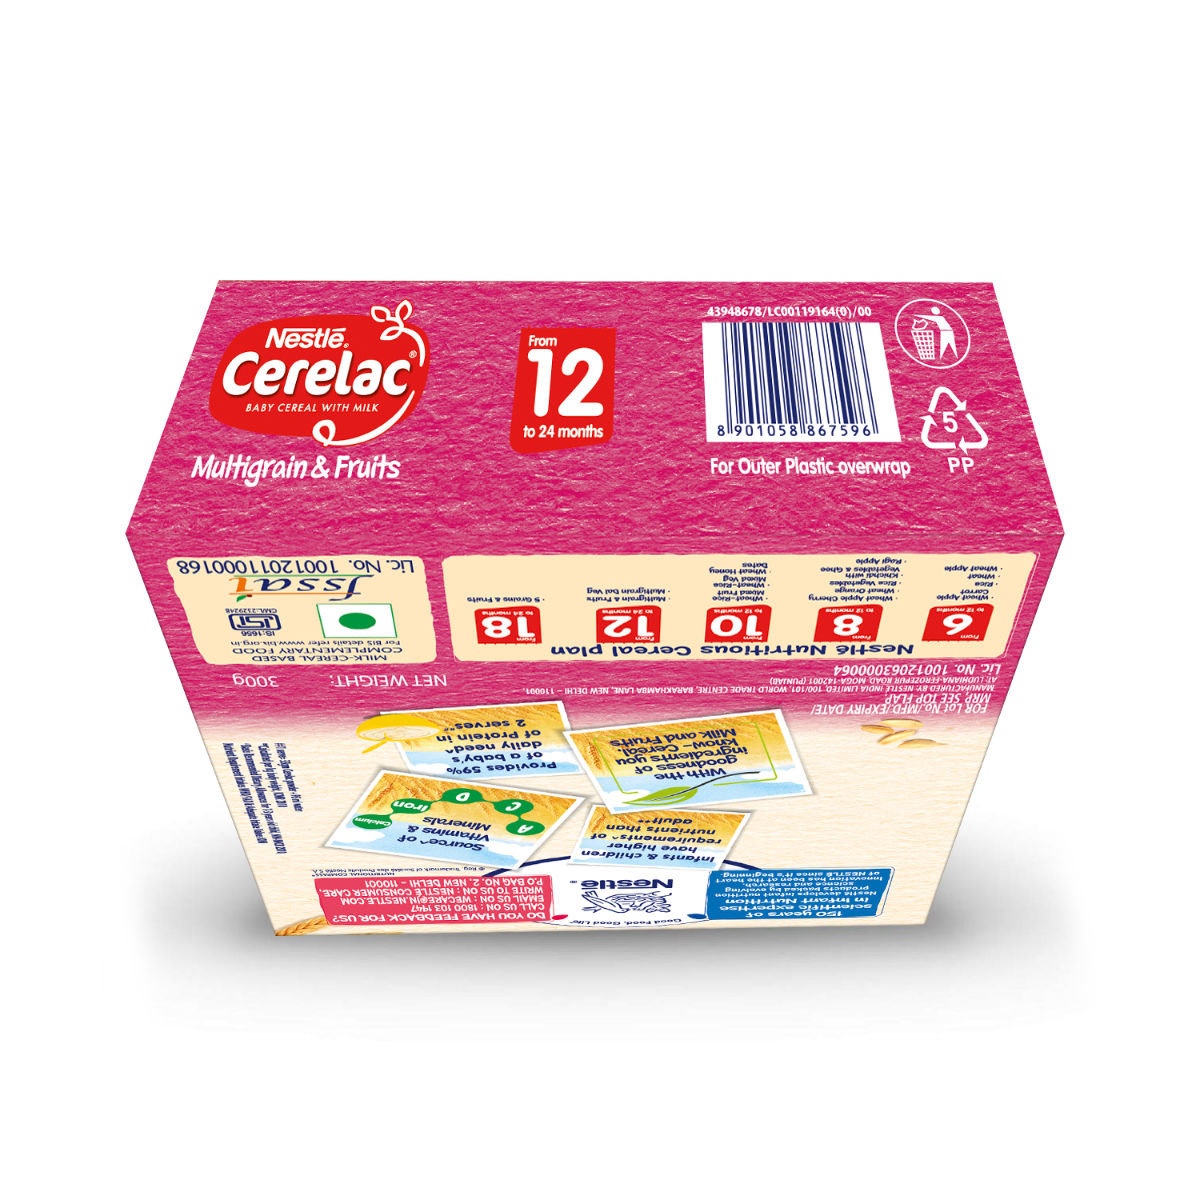 Nestle Cerelac Baby Cereal with Milk Wheat Multigrain & Fruits (From 12 to 24 Months) Powder, 300 gm Refill Pack, Pack of 1 